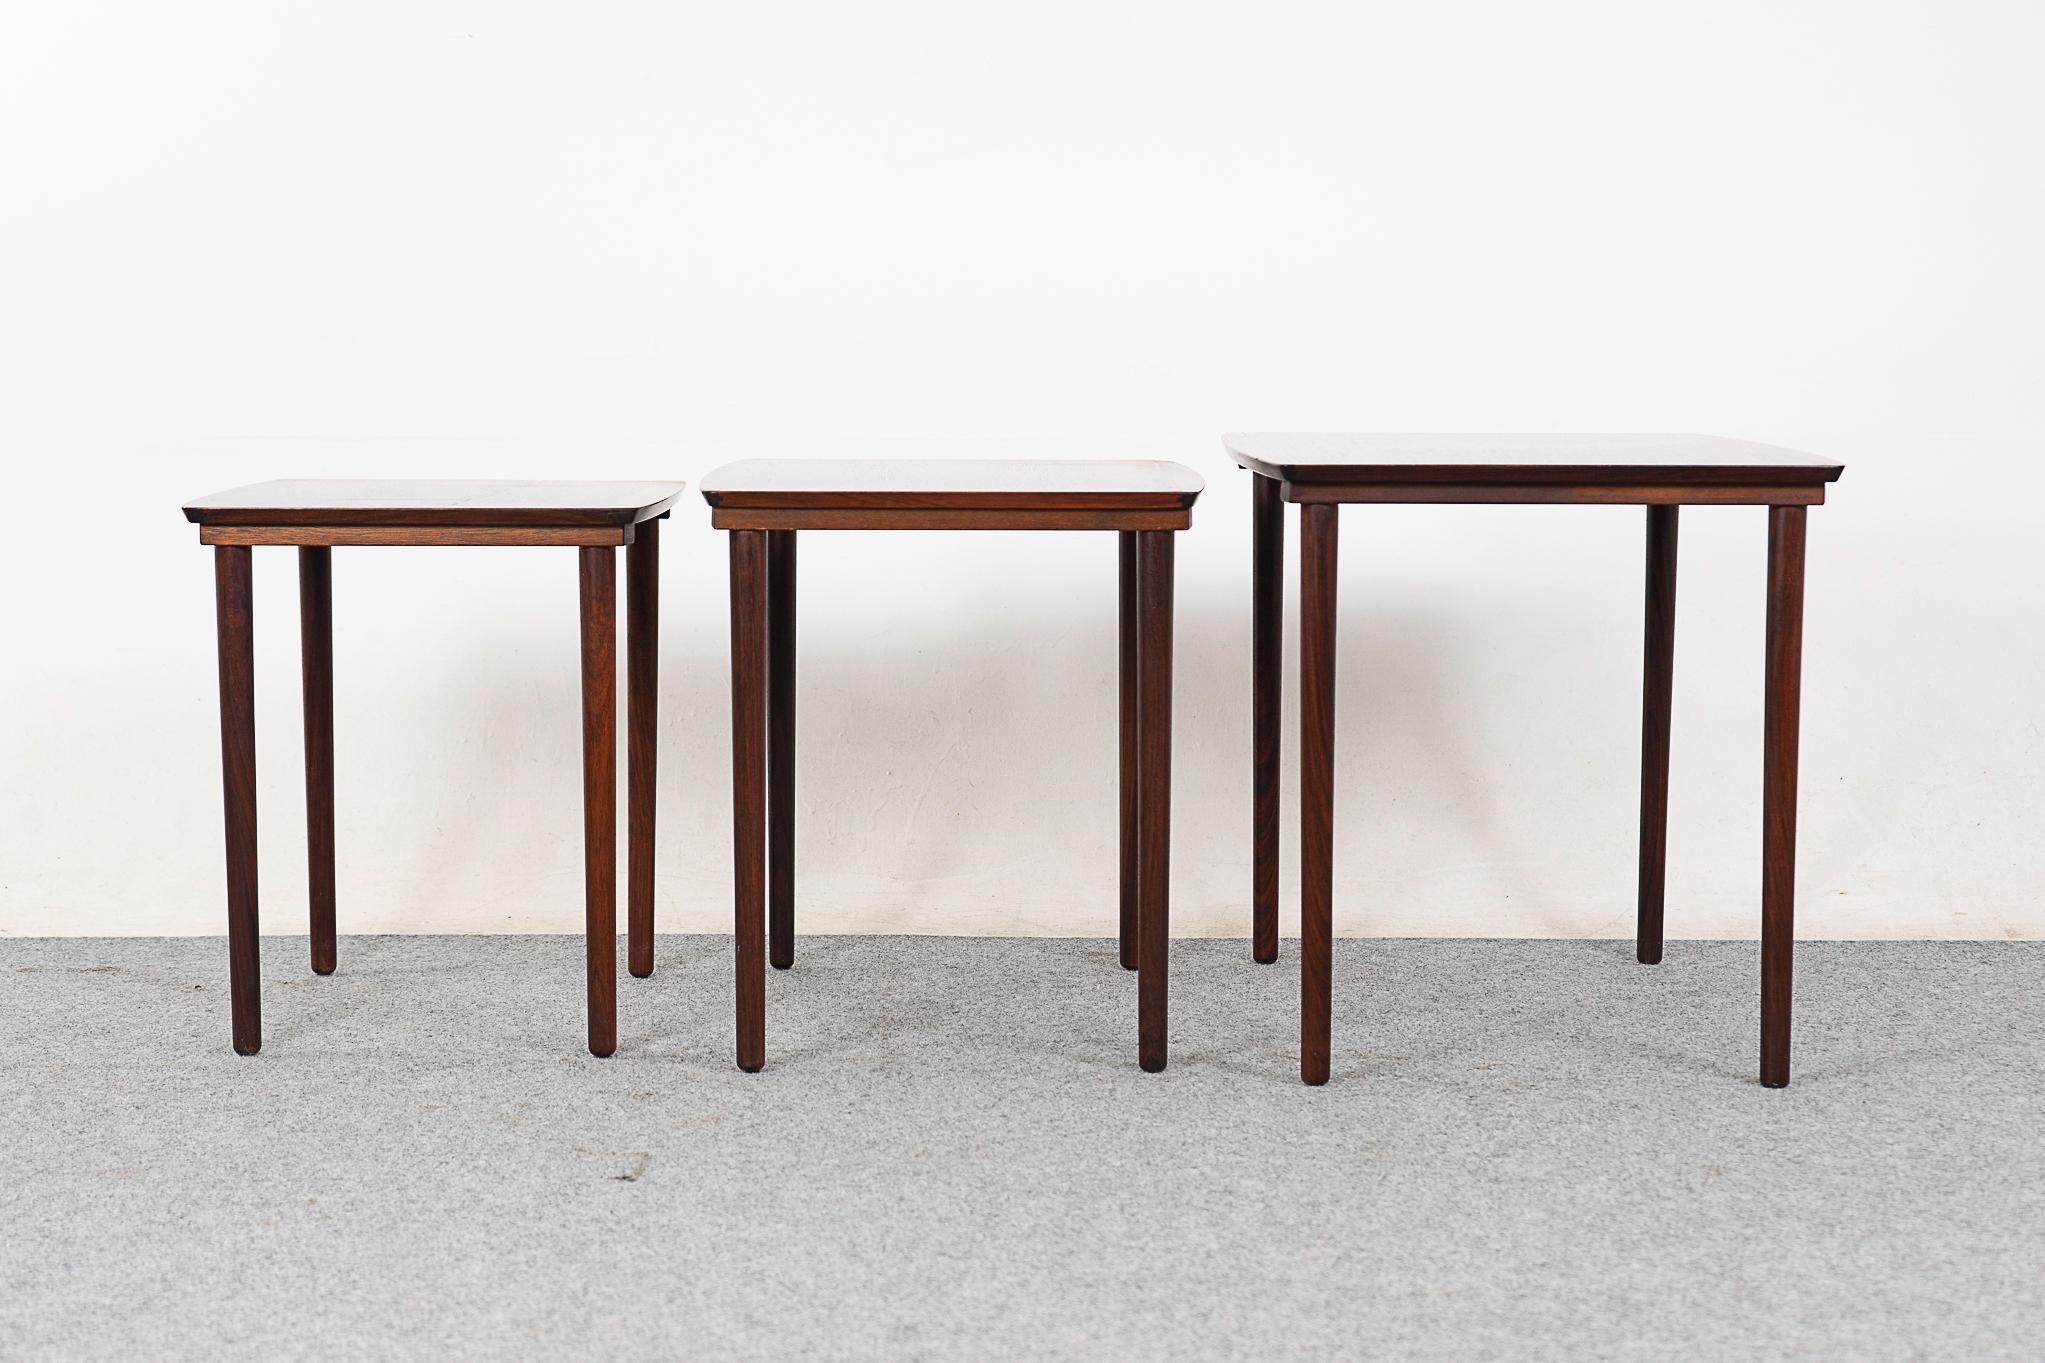 Danish Mid-Centruy Modern Rosewood Nesting Tables by Mobelintarsia For Sale 2